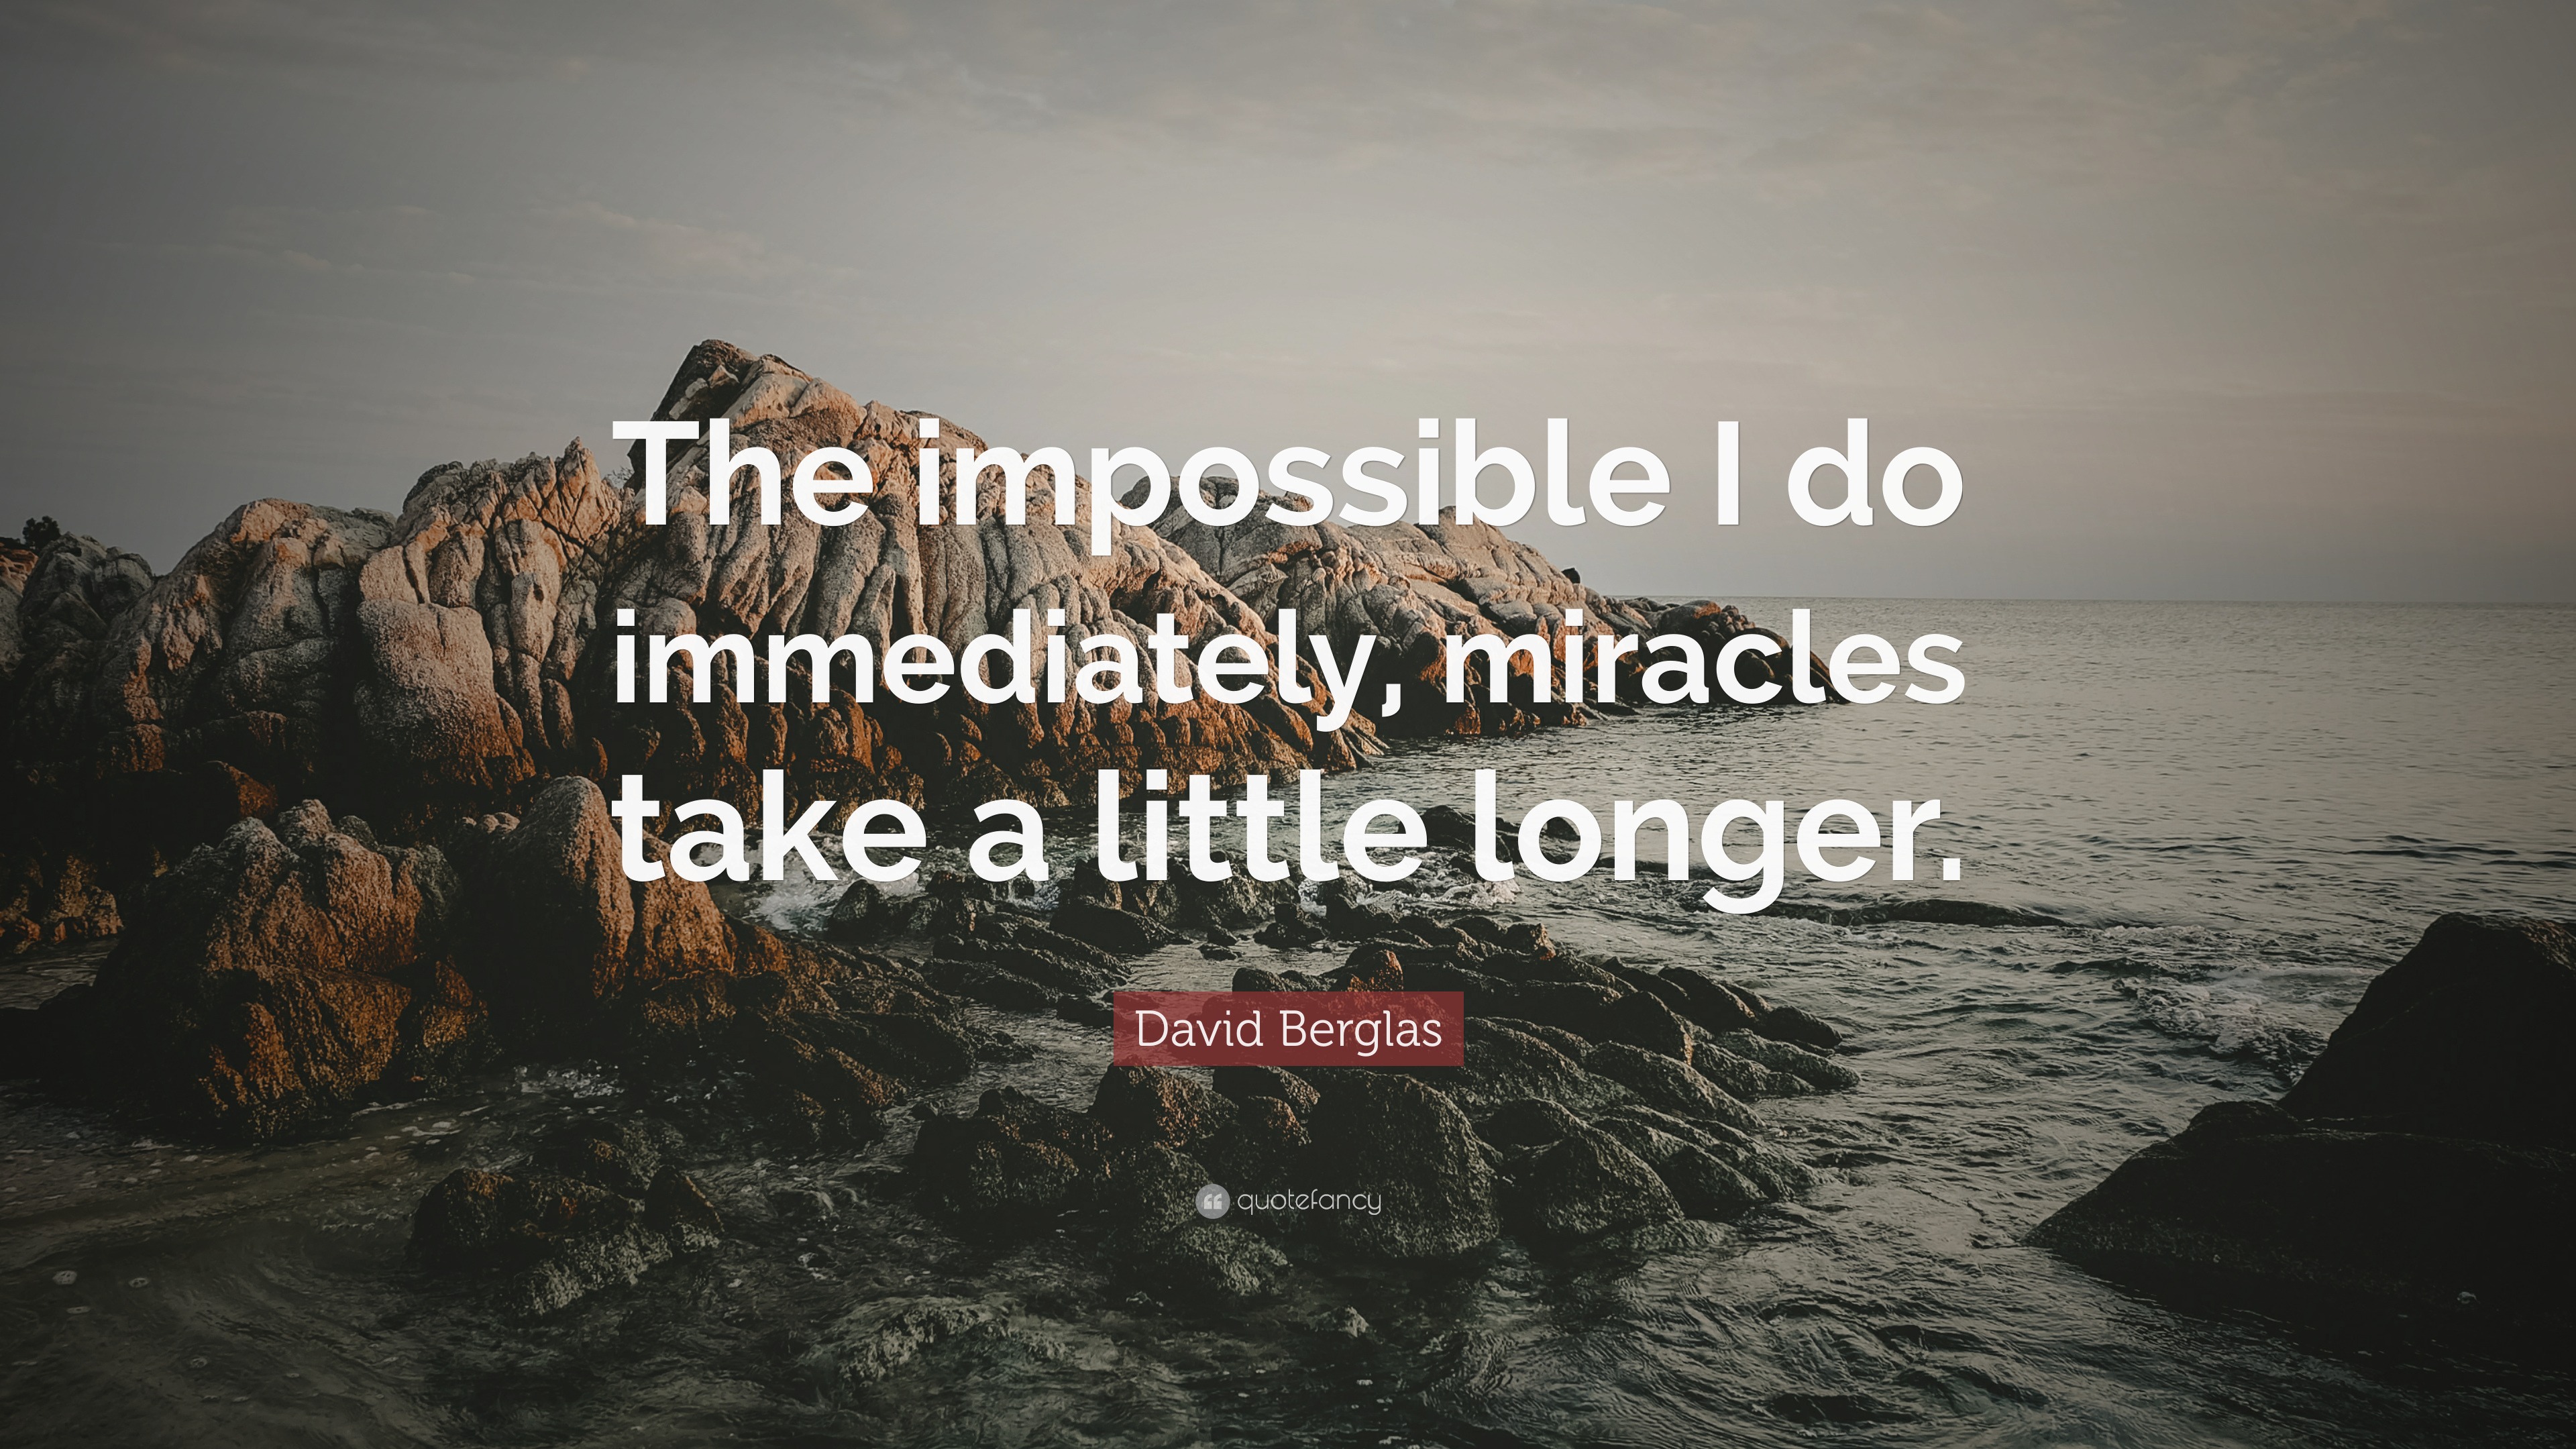 David Berglas Quote: “The impossible I do immediately, miracles take a